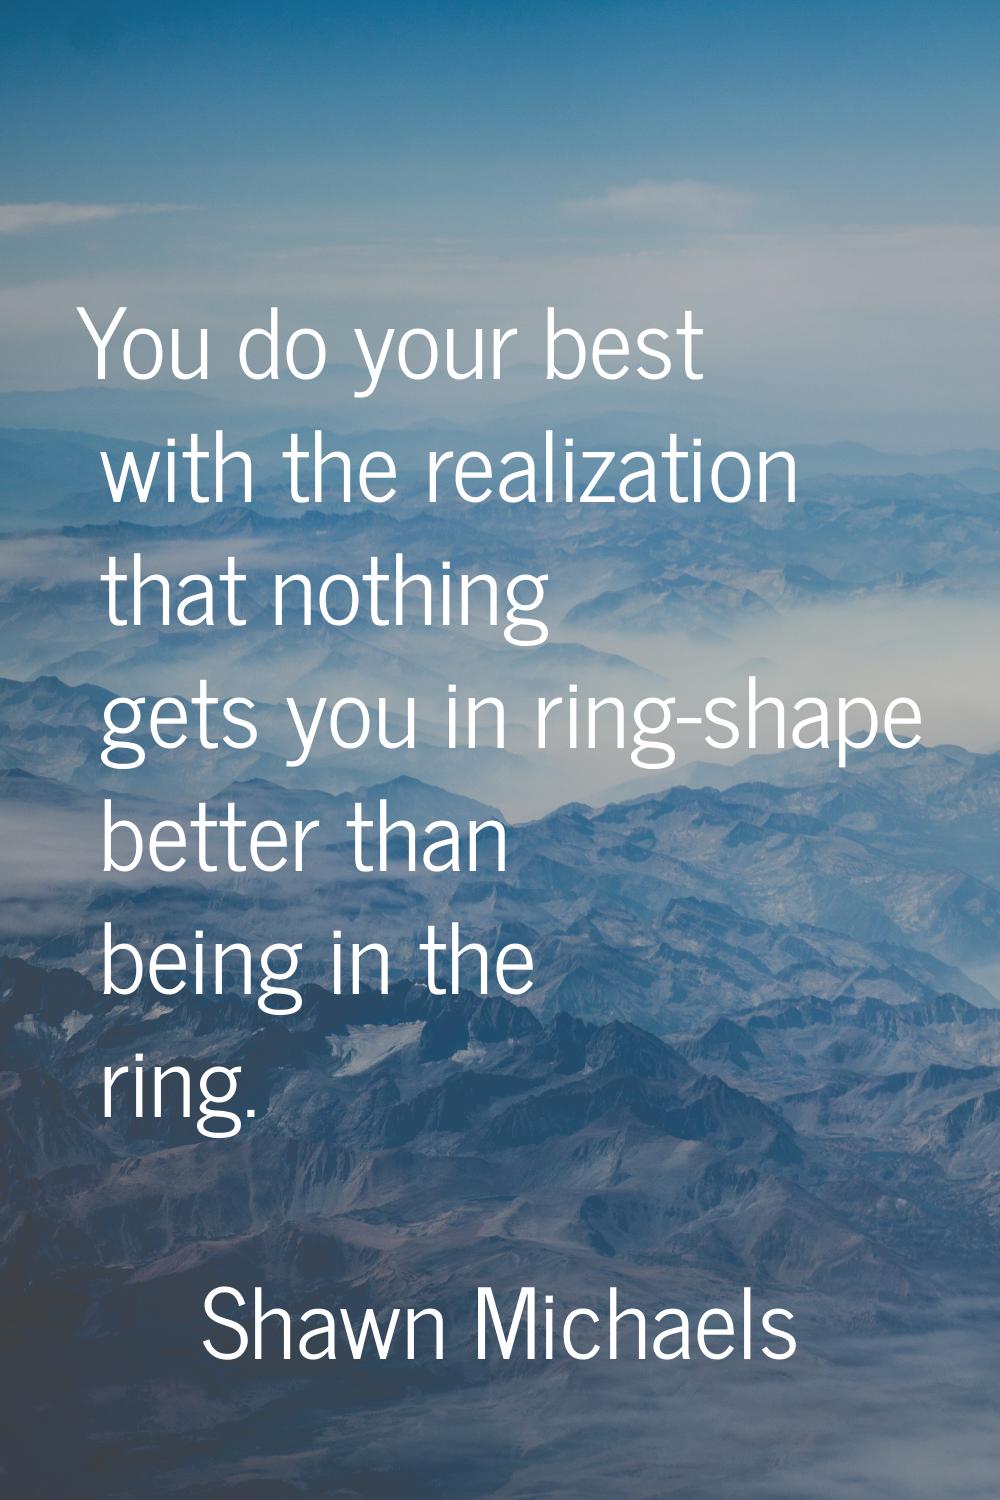 You do your best with the realization that nothing gets you in ring-shape better than being in the 